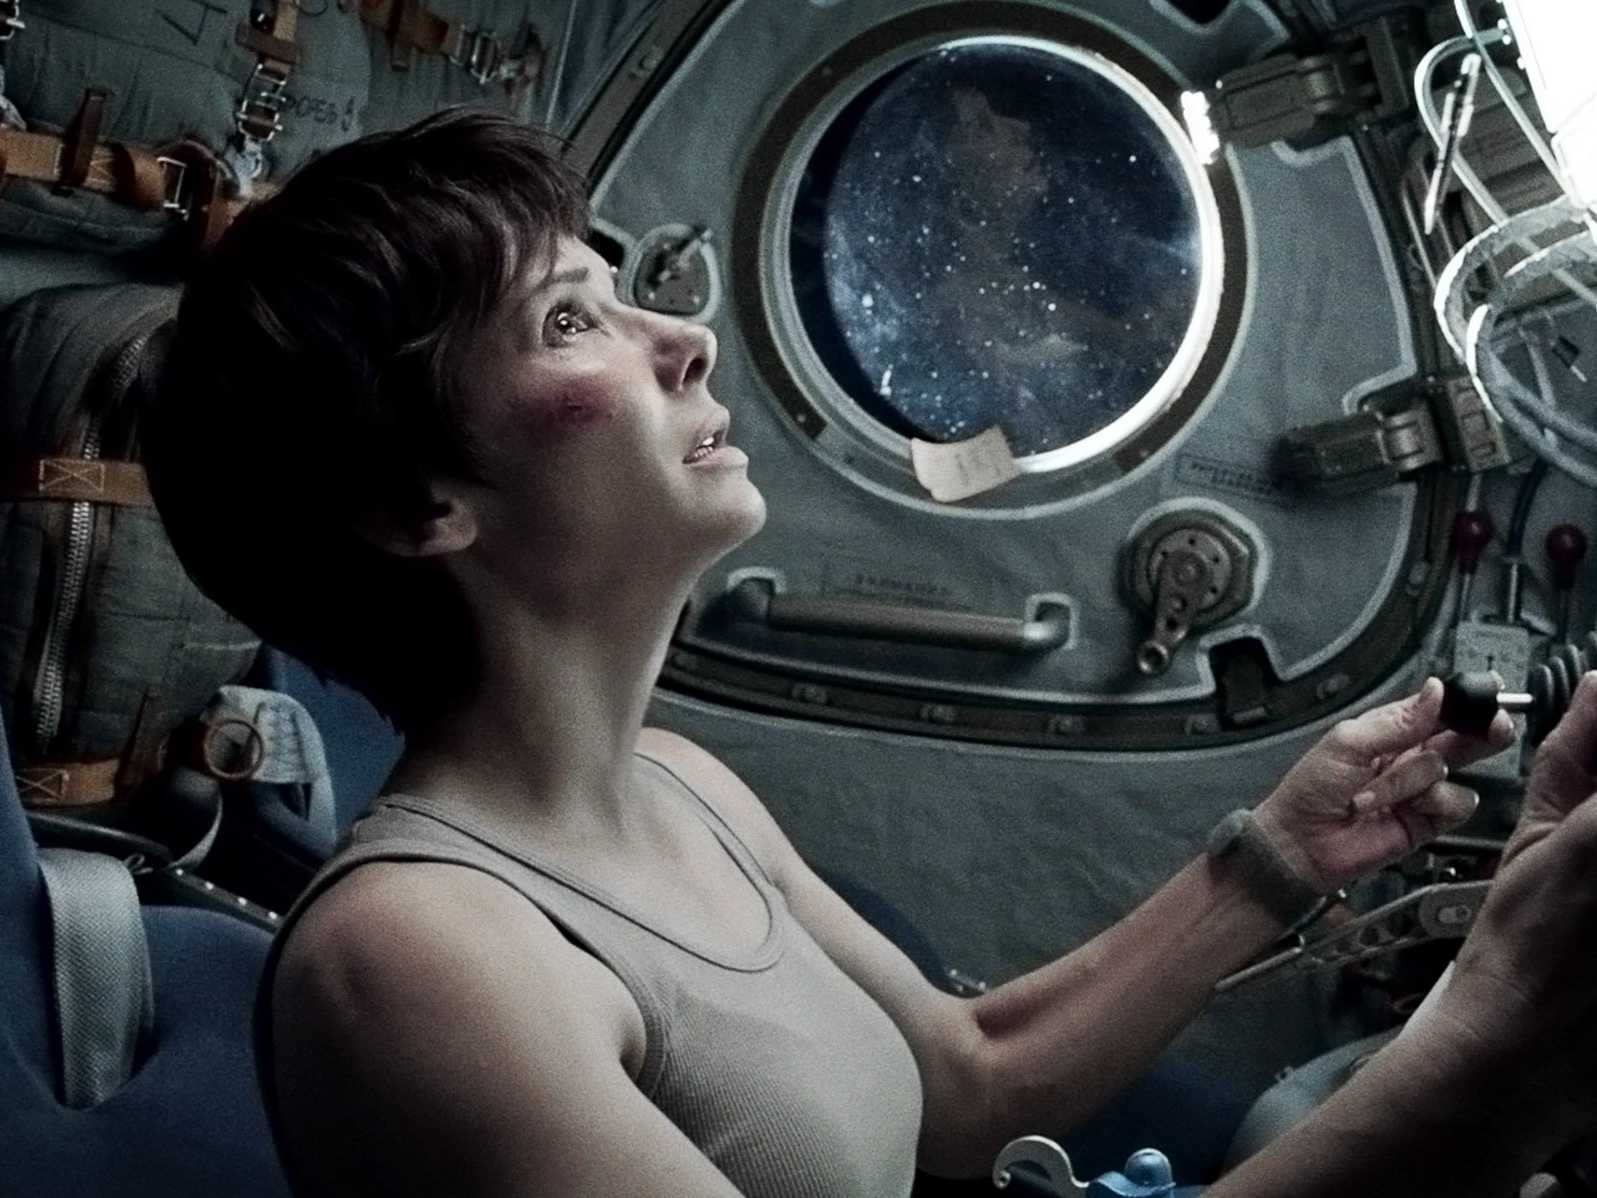 gravity-continues-to-dominate-the-box-office-for-3-weeks-straight.jpg